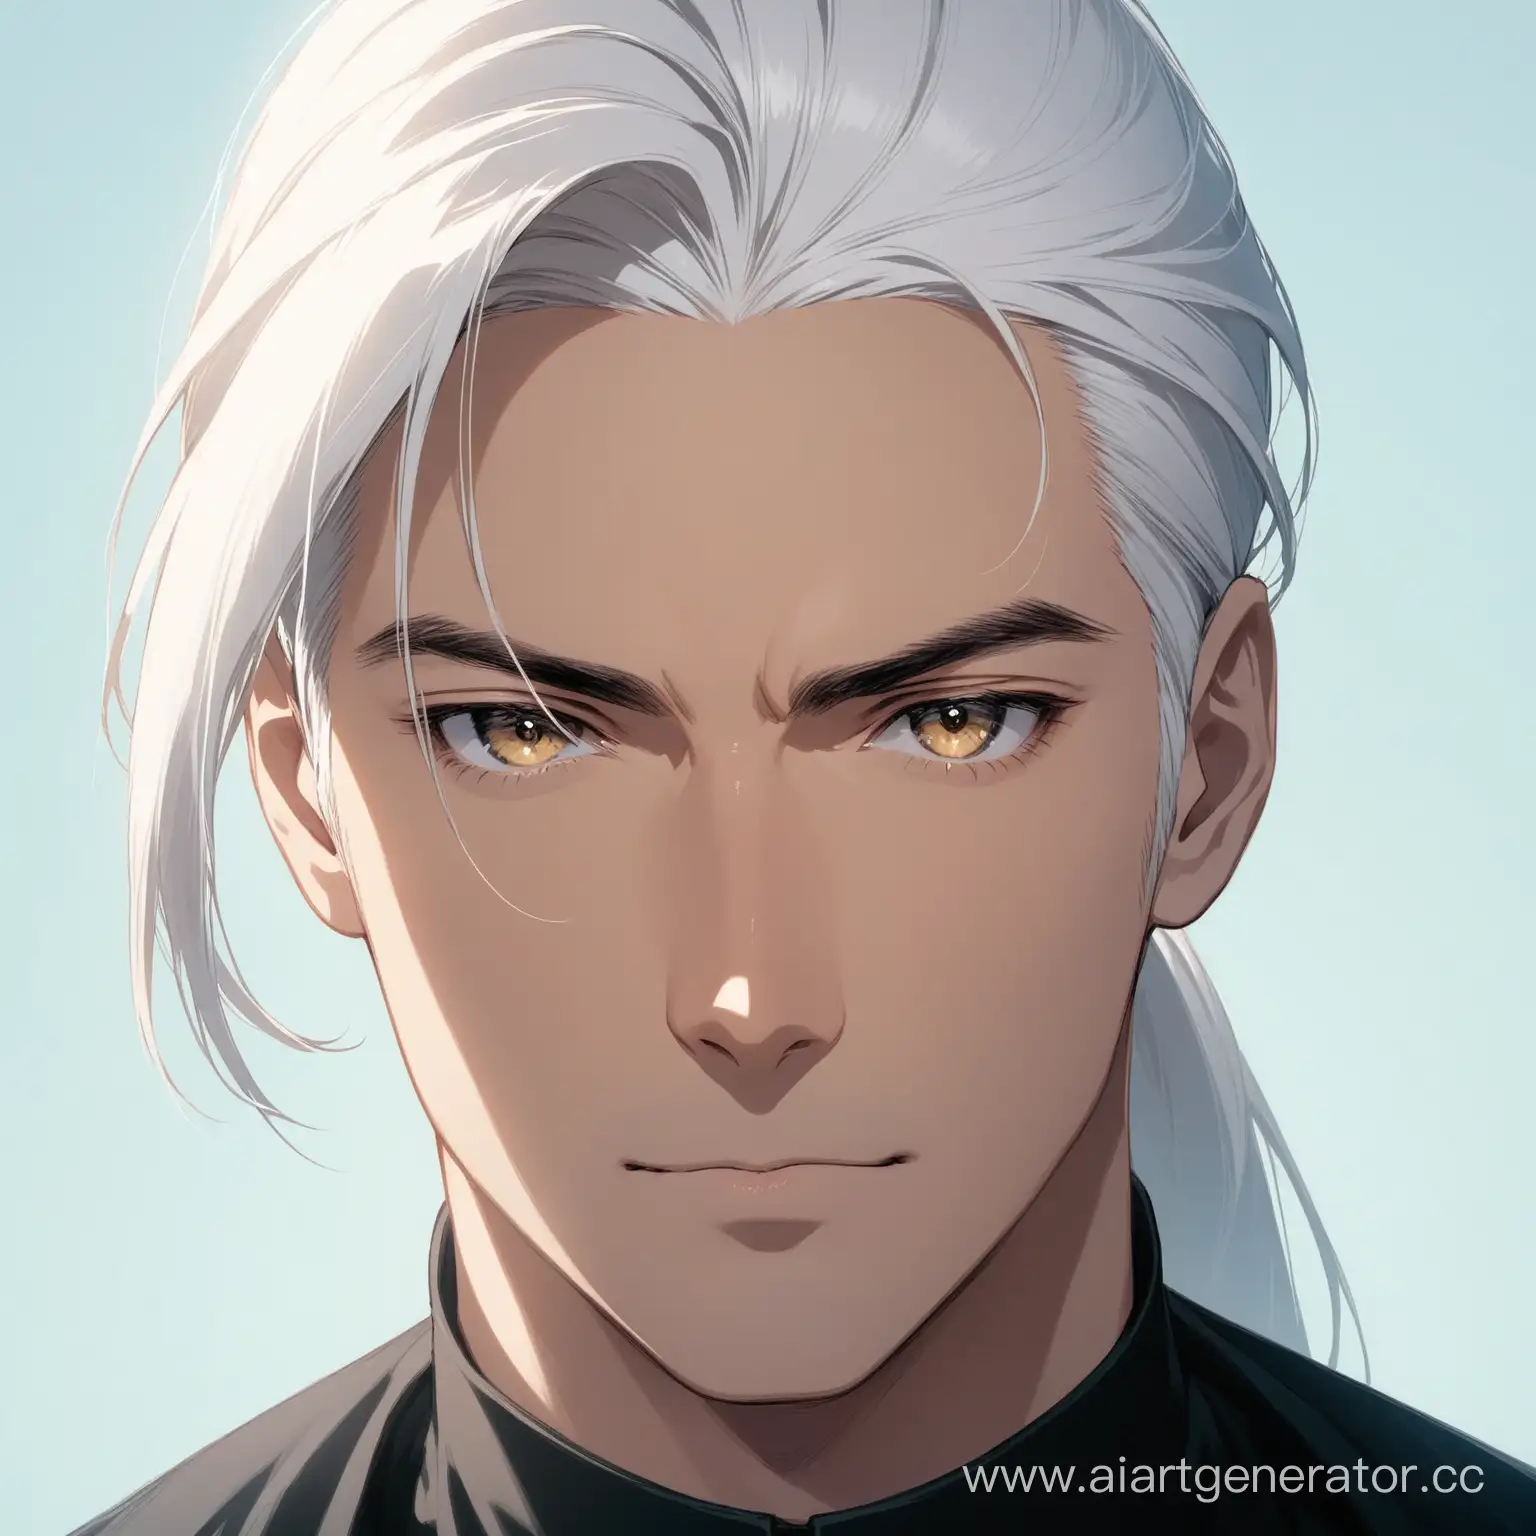 A man with white hair with a ponytail looks directly at the camera